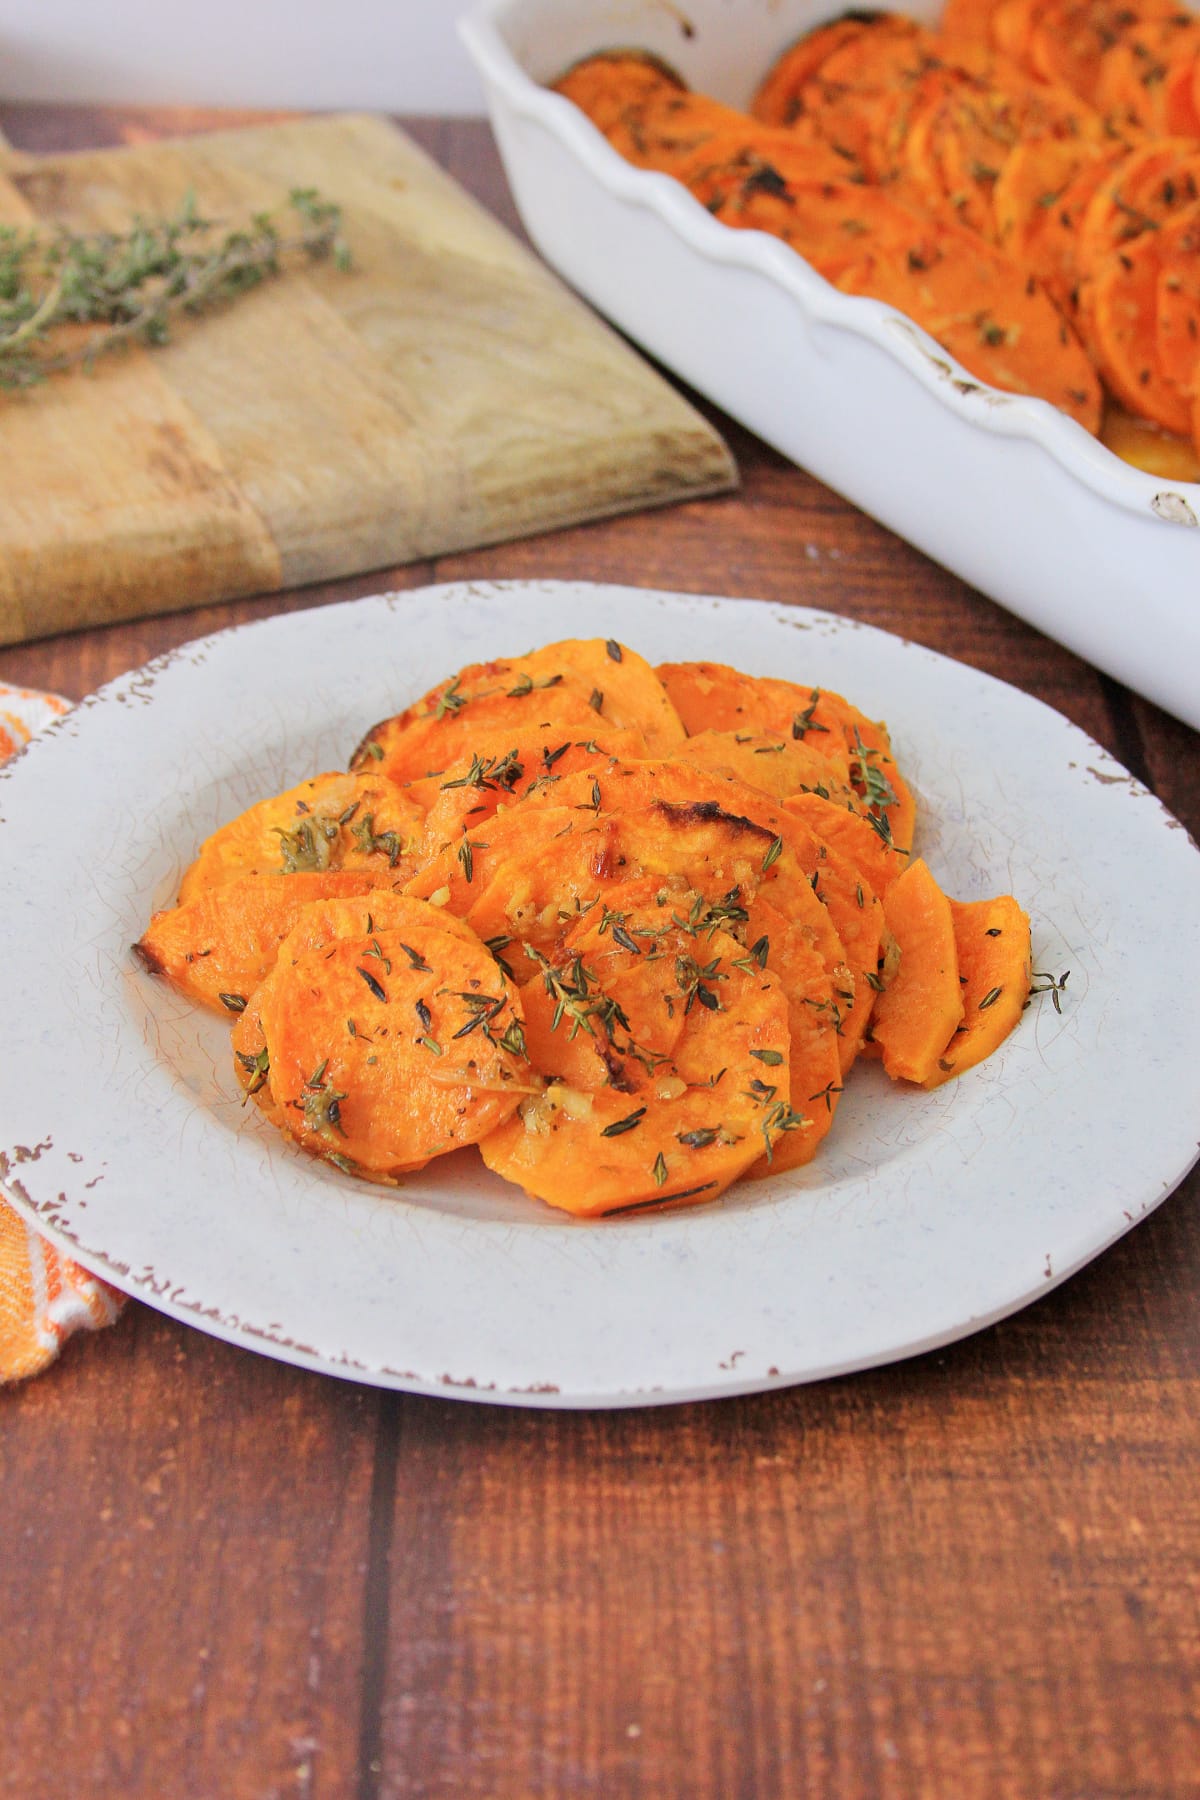 Roasted sweet potato slices in white dish